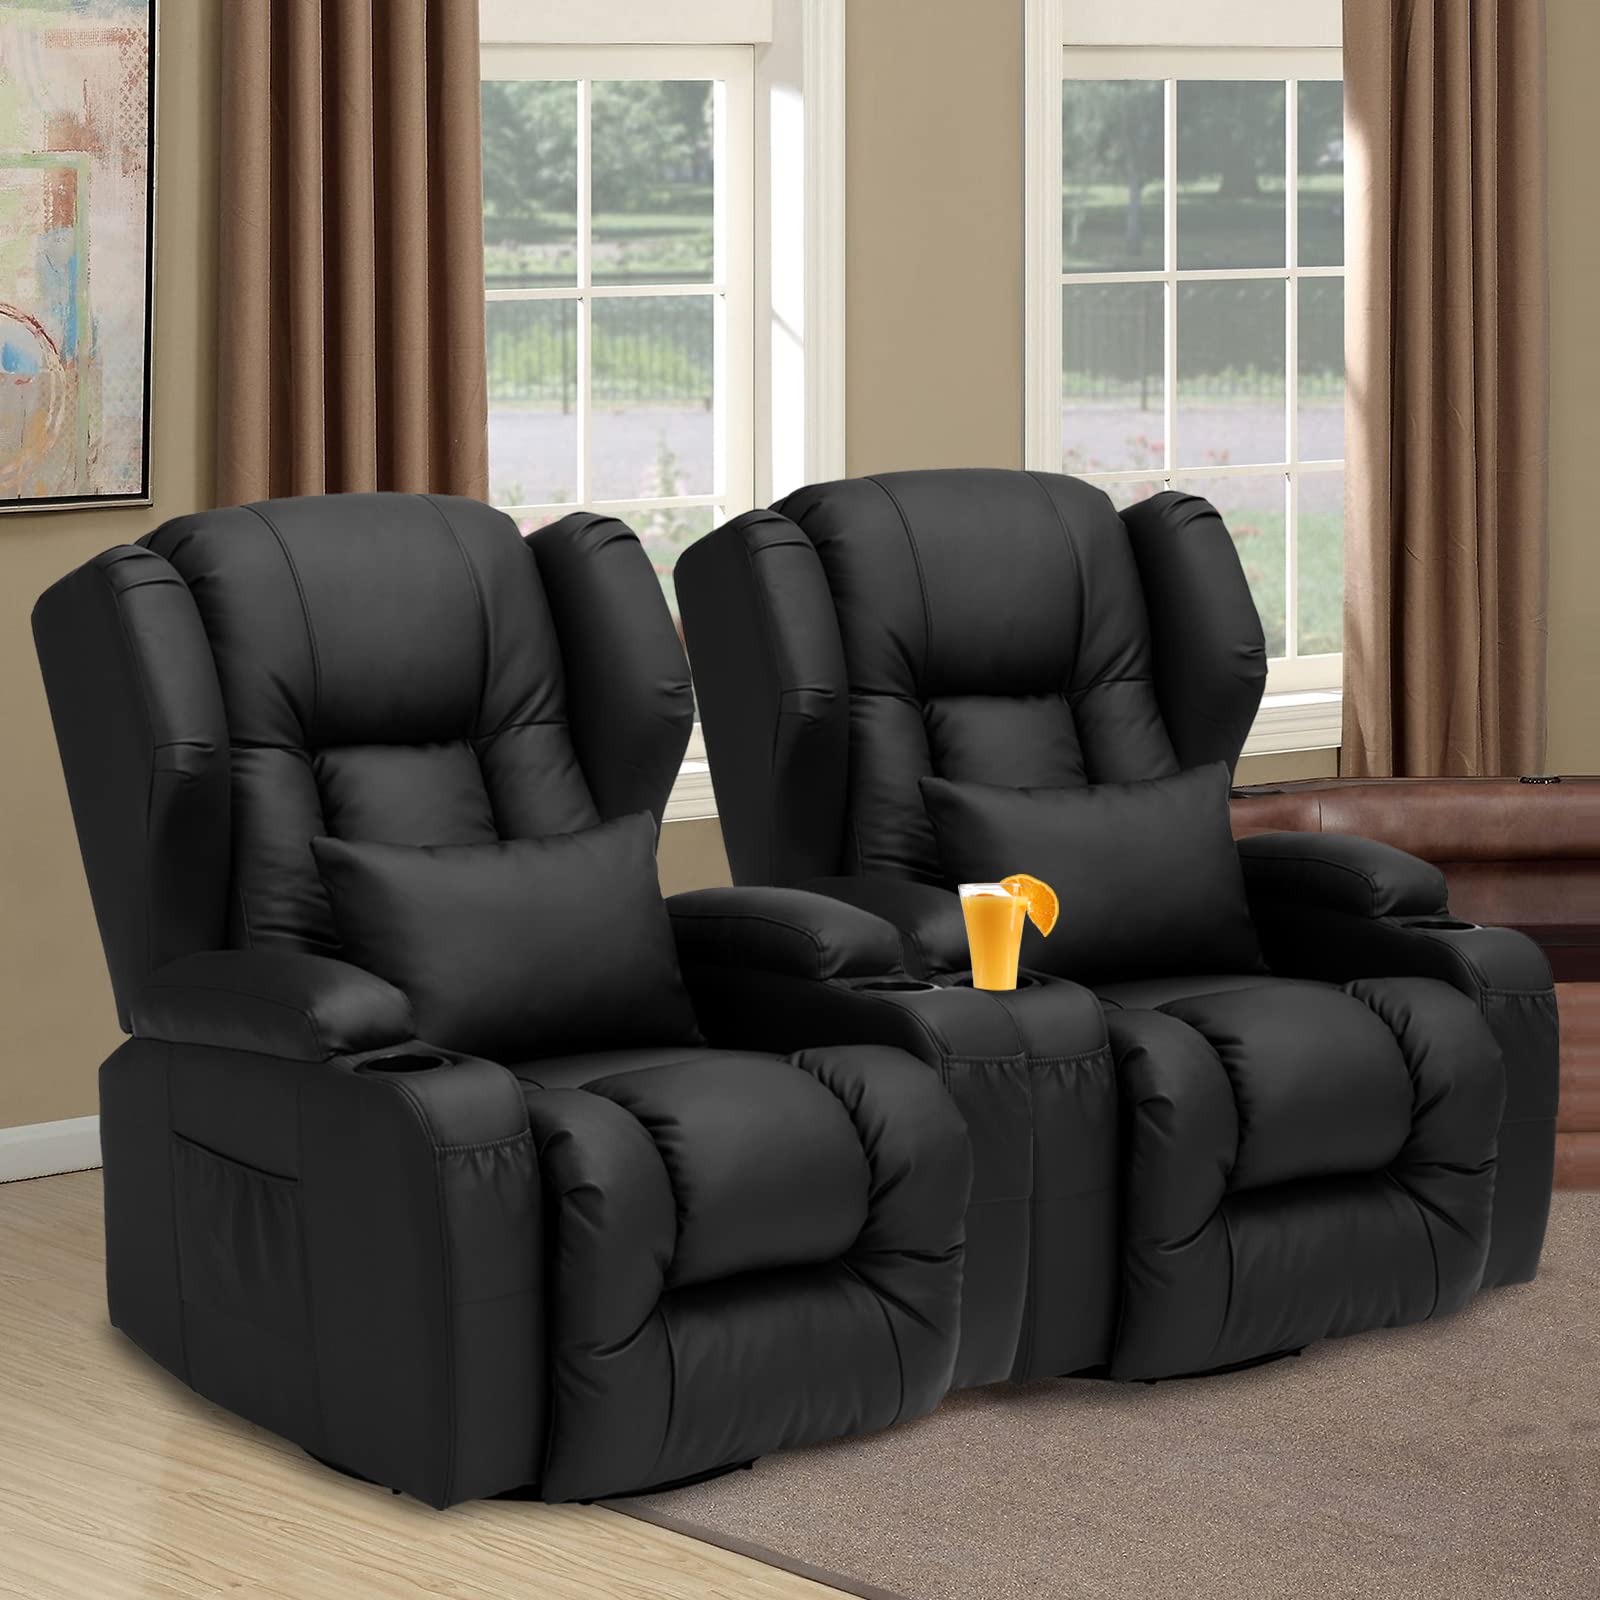 Oqqoee Recliner Chair 2 Pcs Nurseryaswivel Rocker Recliner Chair For Living Room Wing Back 360 Degree Manual Recliner With Cup H